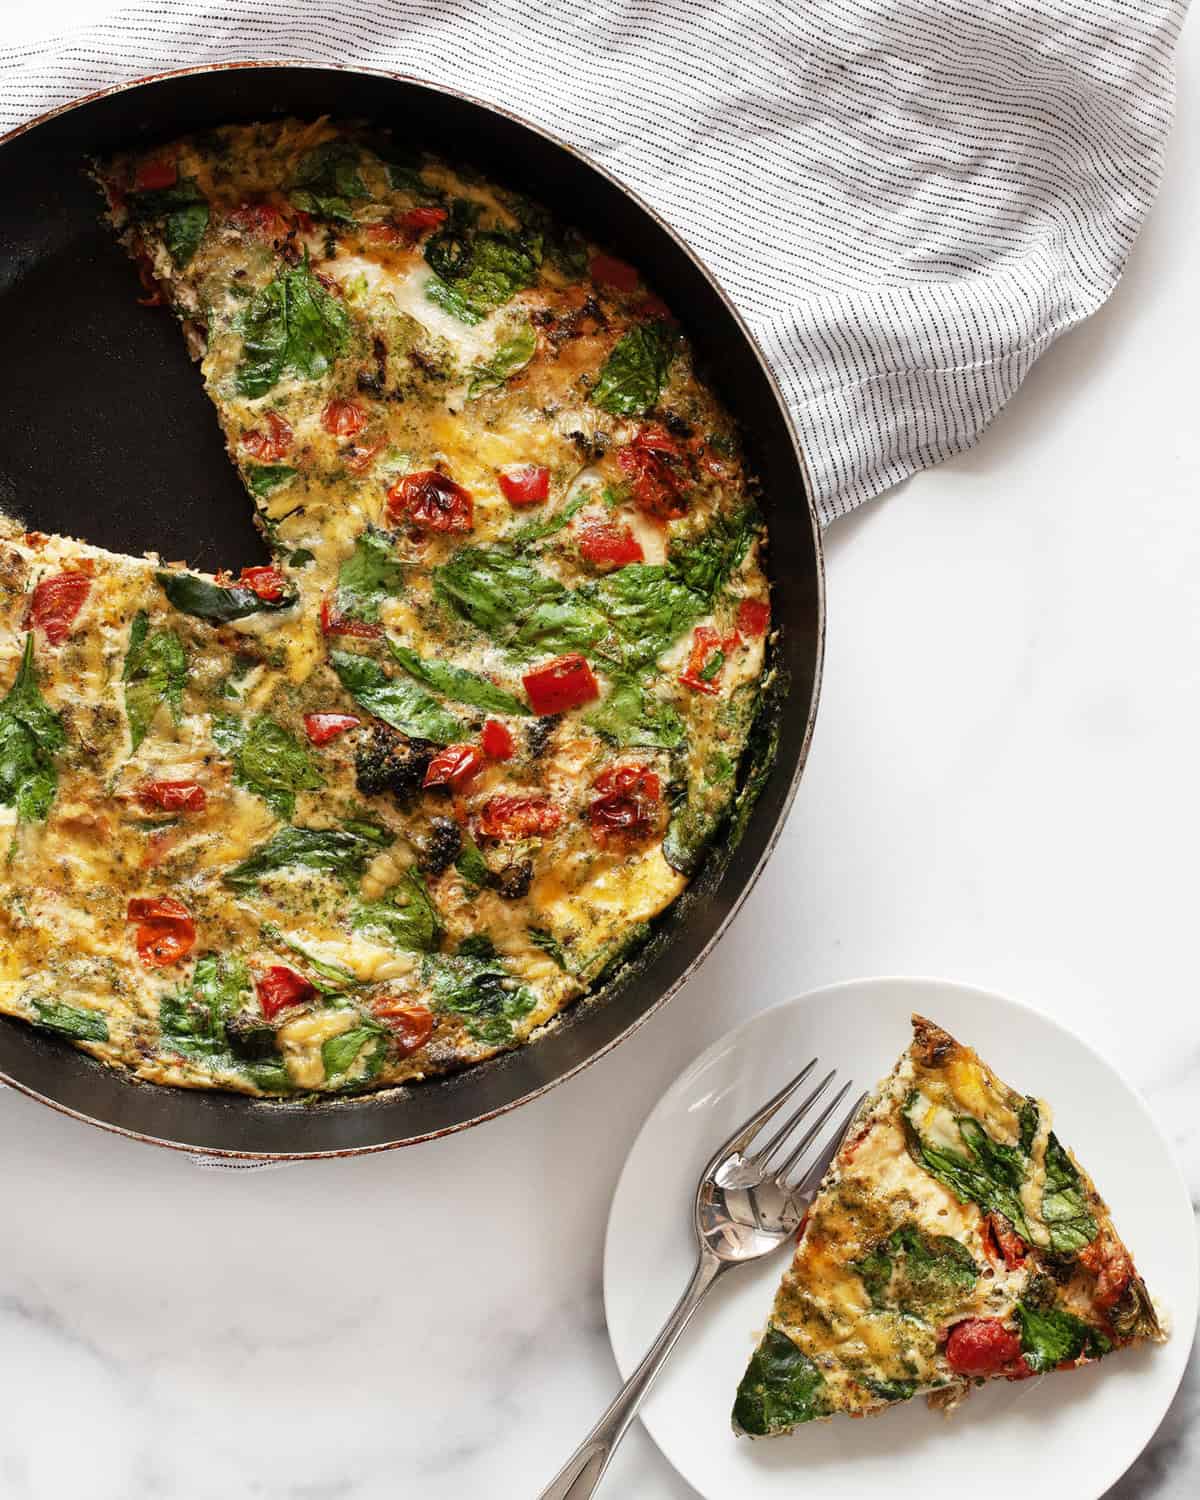 Roasted vegetable frittata in a skillet with a slice on a plate.